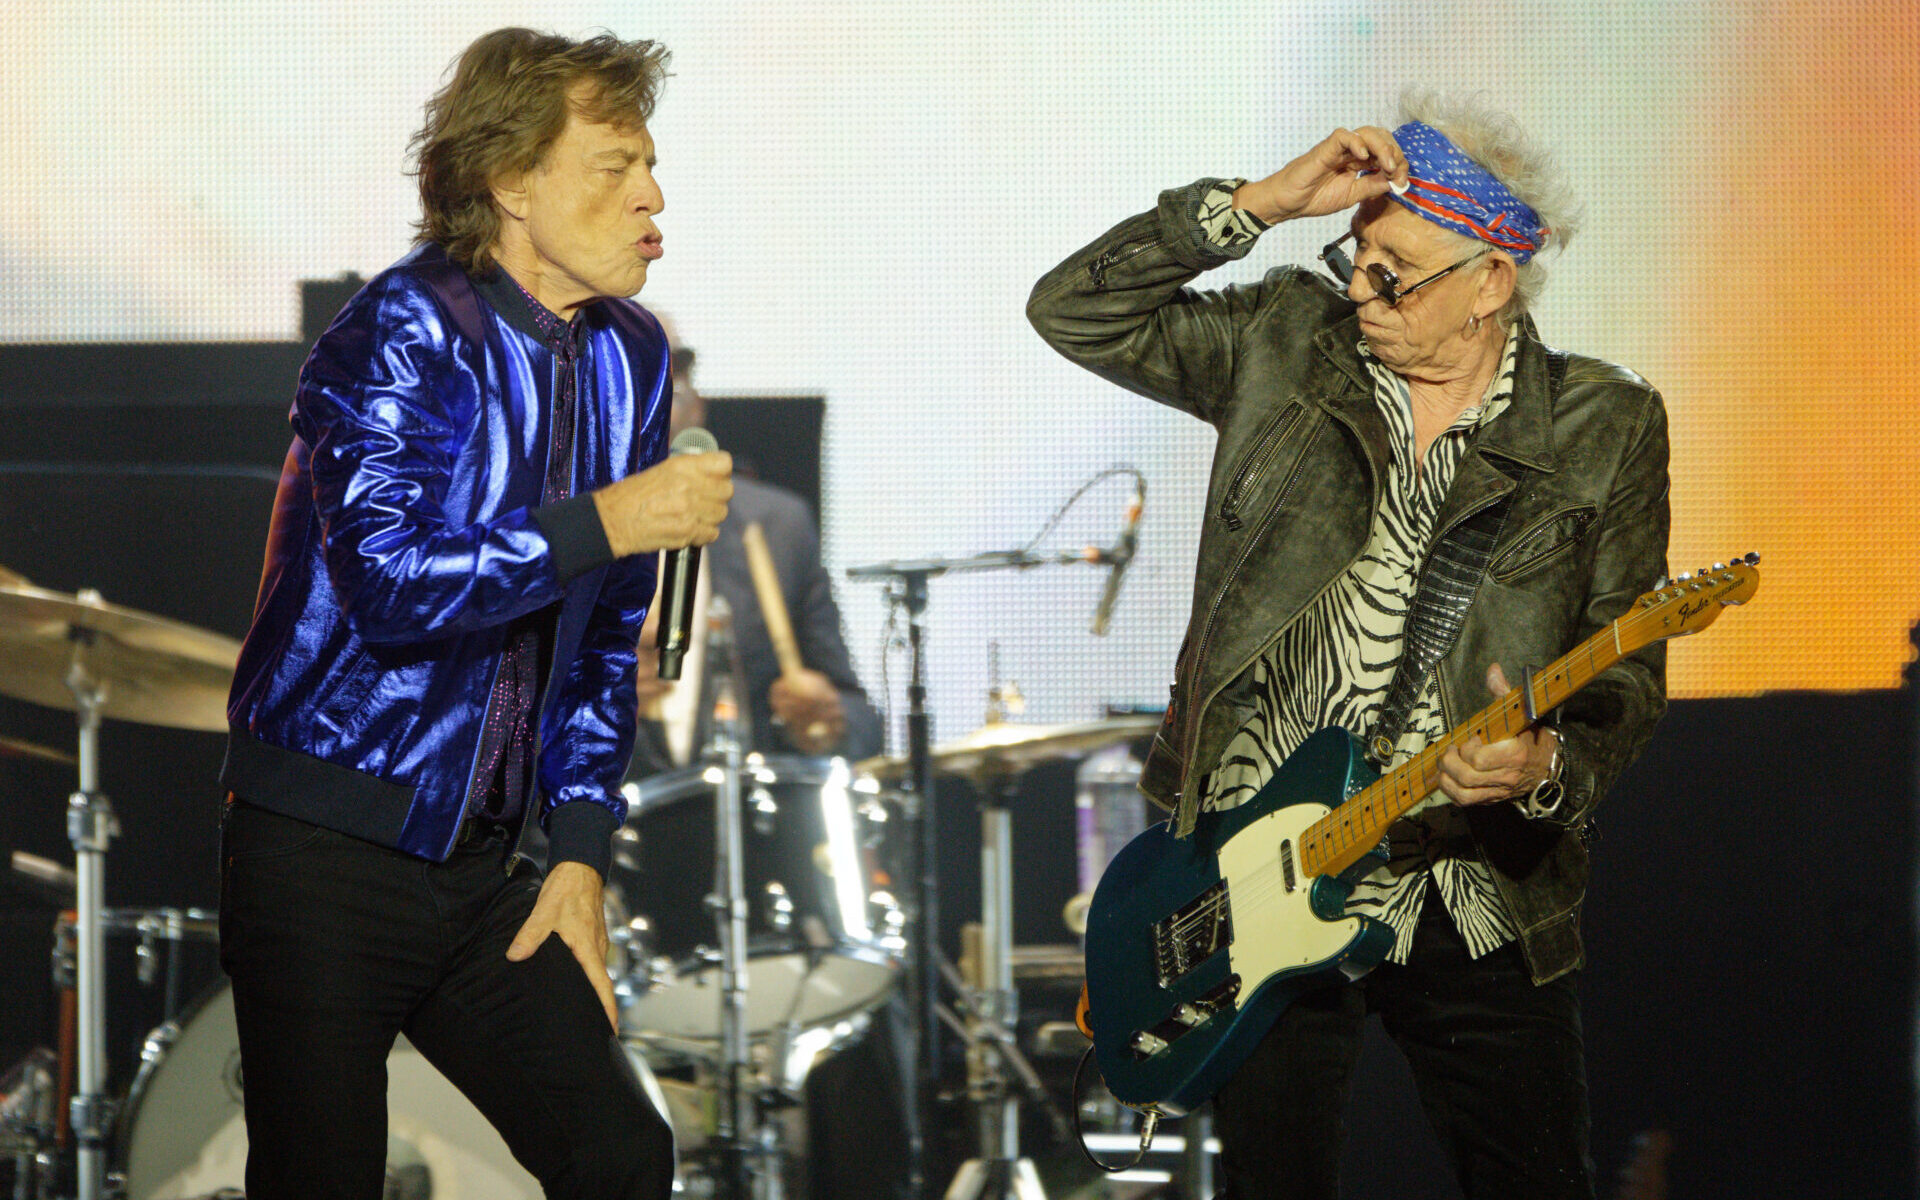 27 July 2022, North Rhine-Westphalia, Gelsenkirchen: Musicians Mick Jagger (l) and Keith Richards are on stage during a Rolling Stones concert at the Veltins Arena. Photo: Henning Kaiser/dpa (Photo by Henning Kaiser/picture alliance via Getty Images)